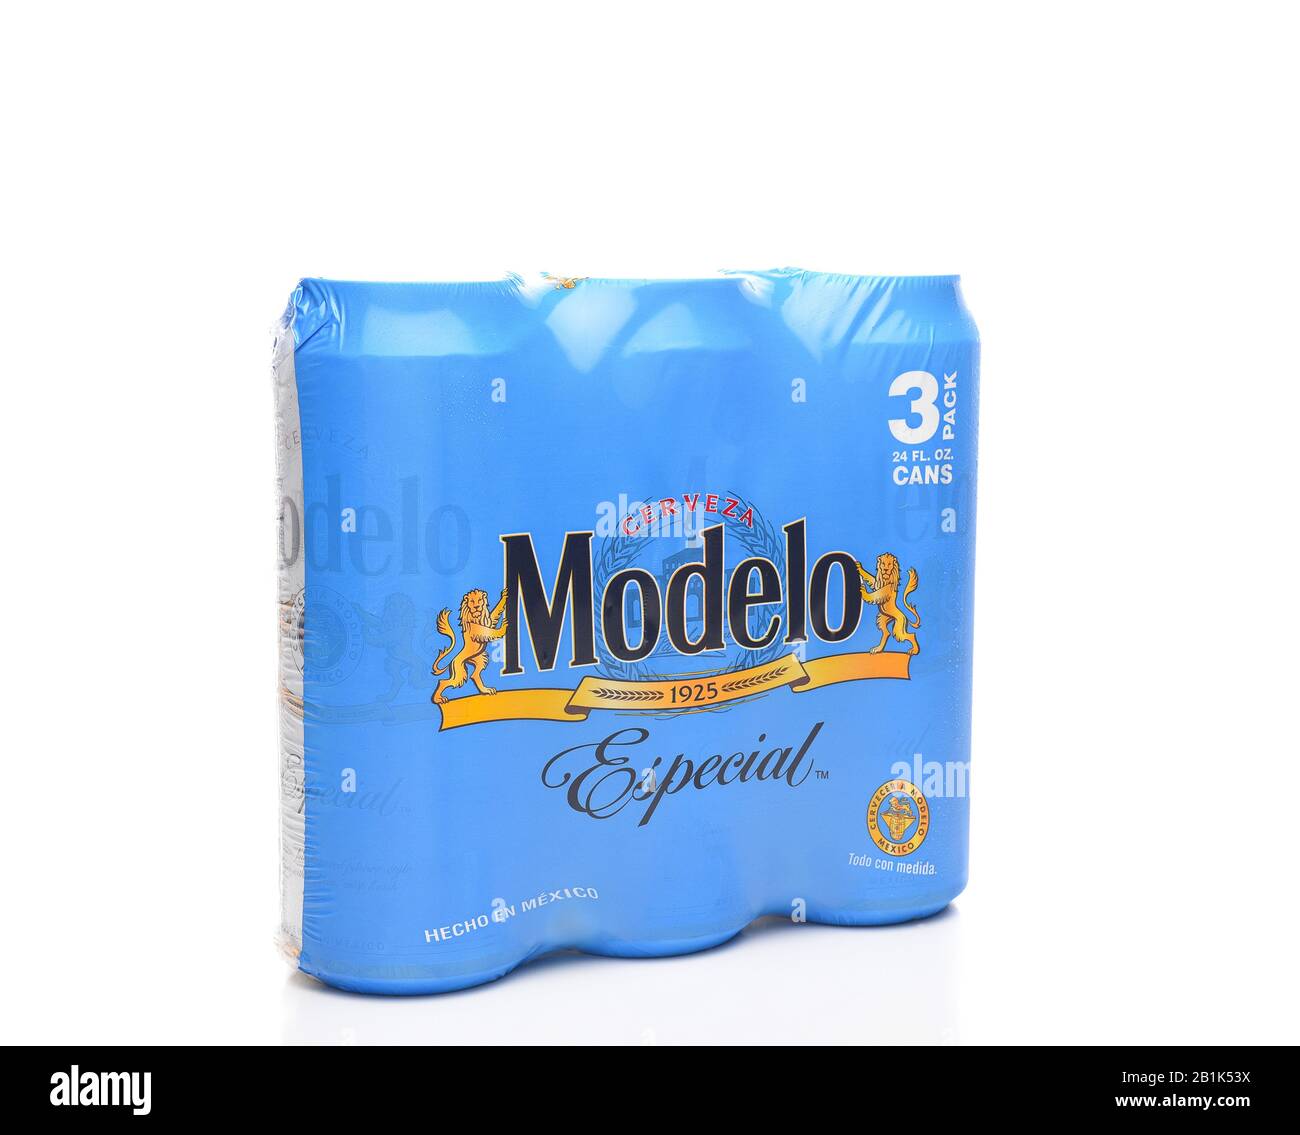 IRVINE, CALIFORNIA - MARCH 21, 2018: 3 pack of Modelo Especial cans. First bottled in 1925, Modelo Especial is the number 2 imported beer in the U.S. Stock Photo